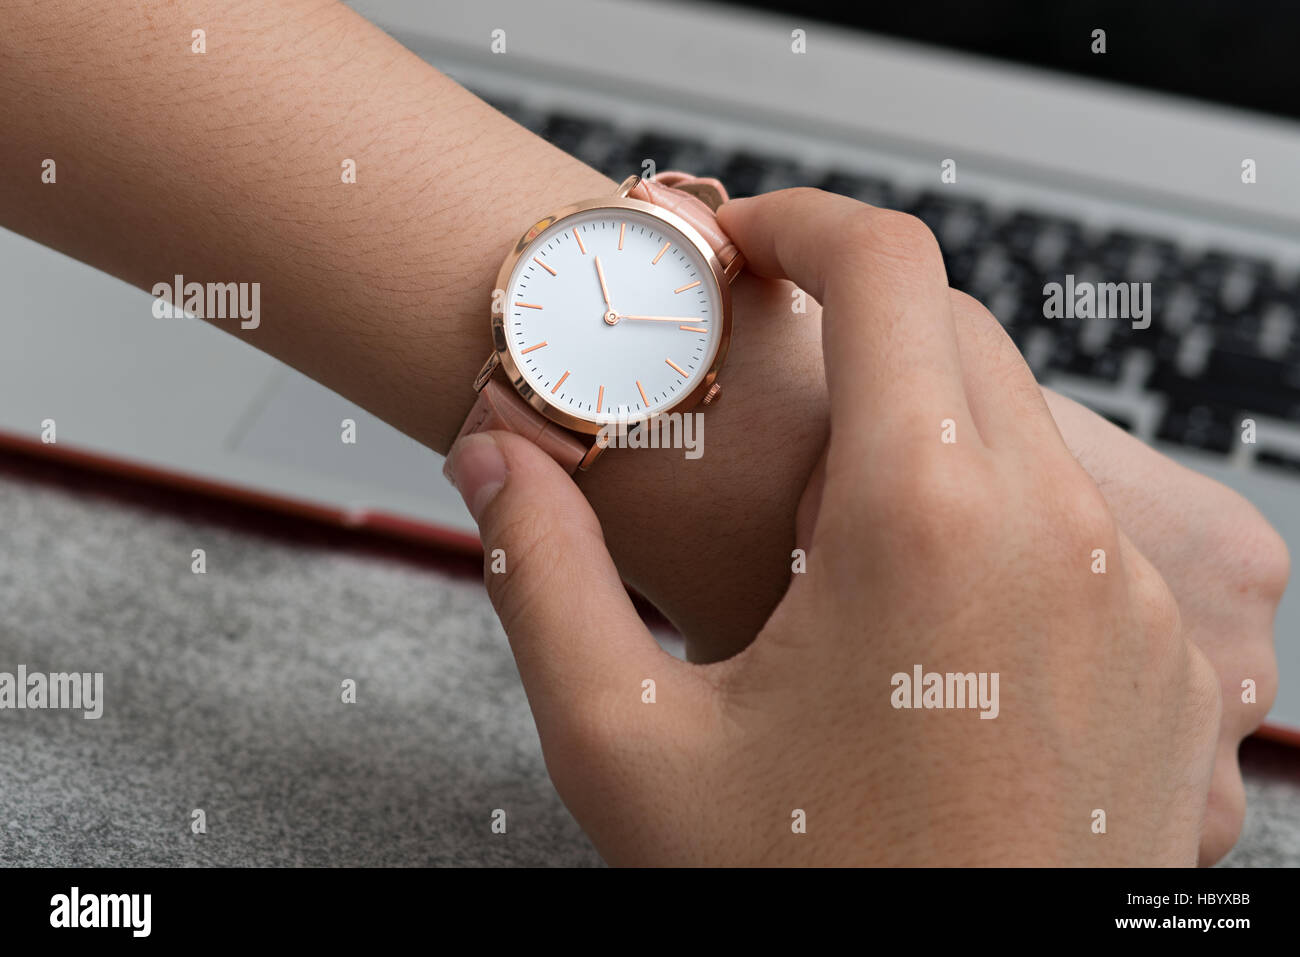 Girl's hand with wrist watch in front of desk with laptop computer Stock Photo